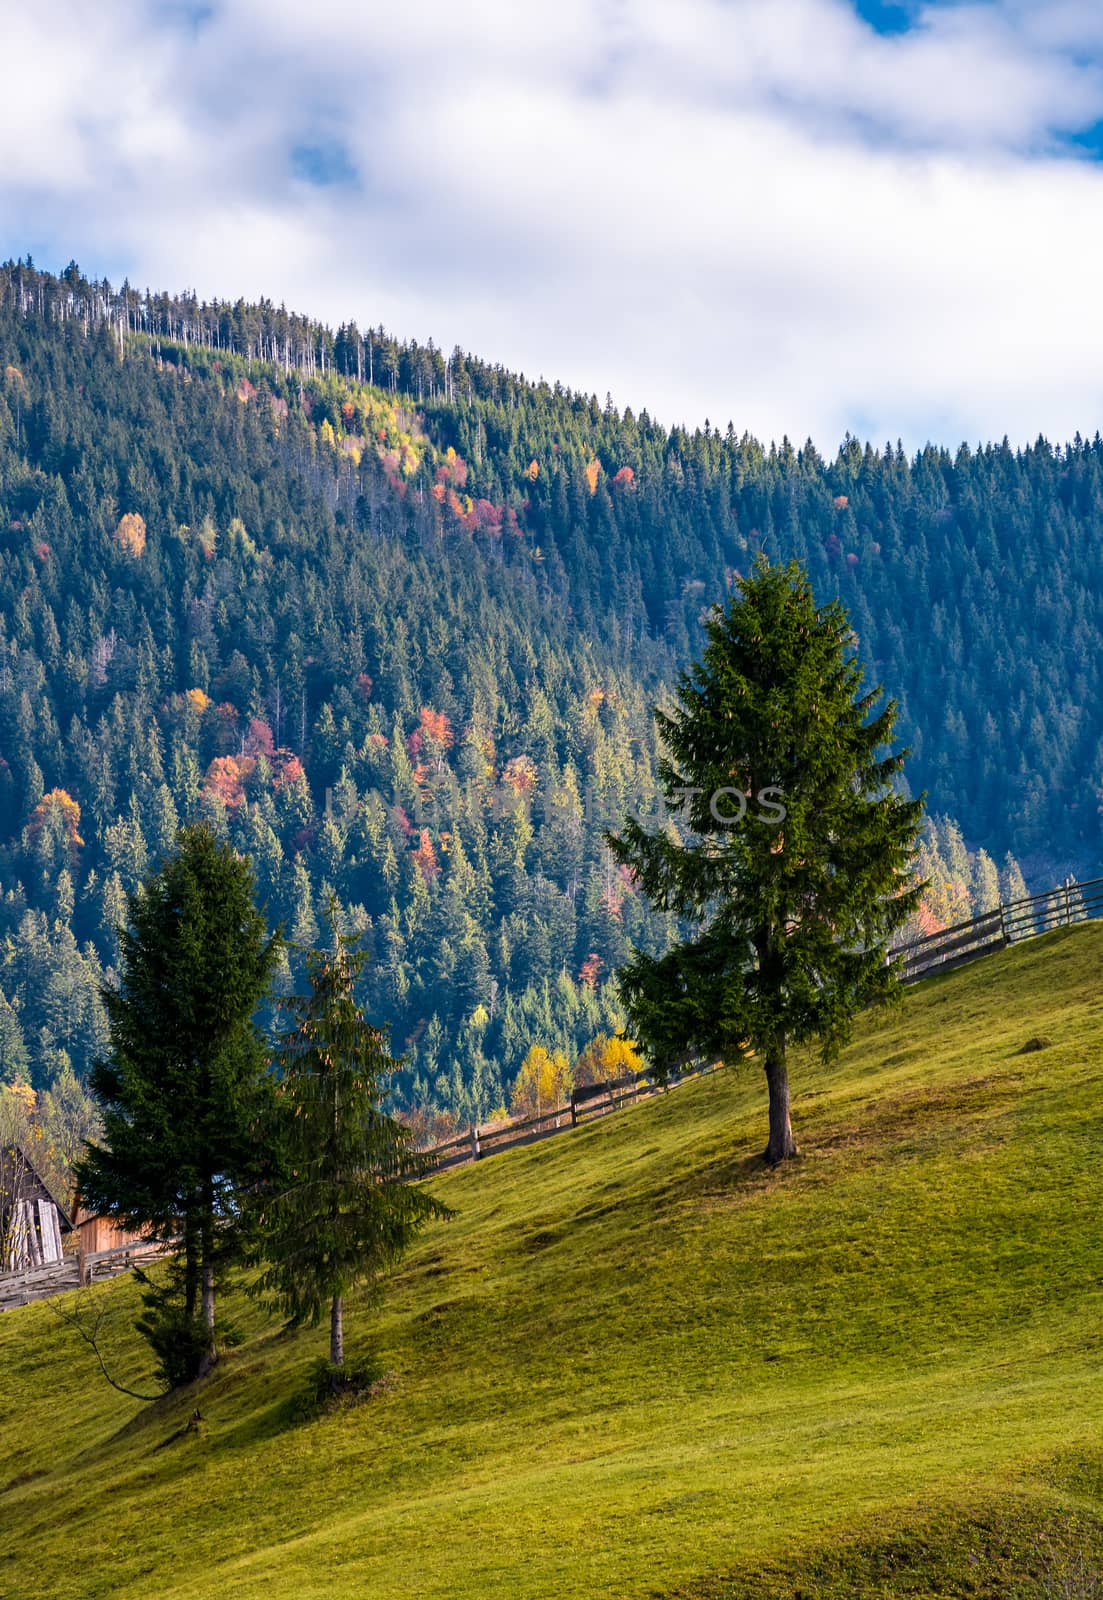 conifer tress on grassy hillside in autumn. beautiful rural scenery in mountains